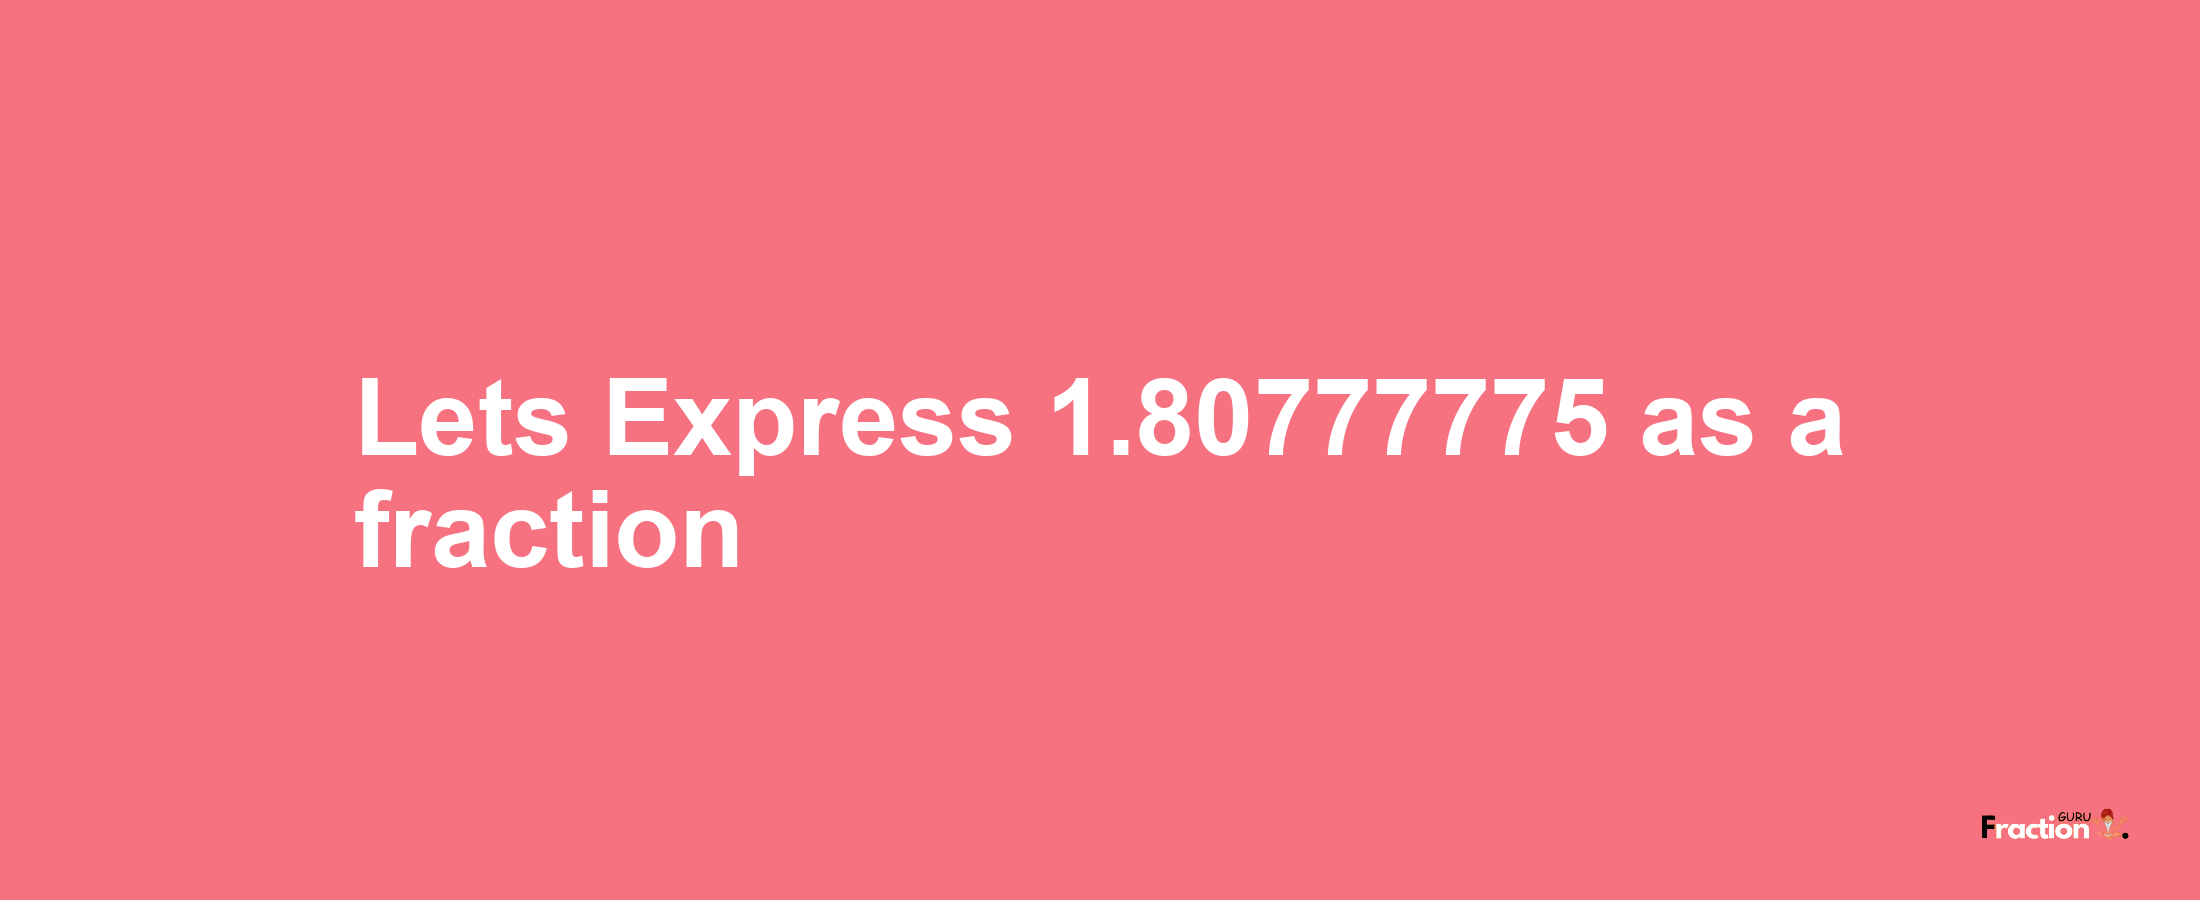 Lets Express 1.80777775 as afraction